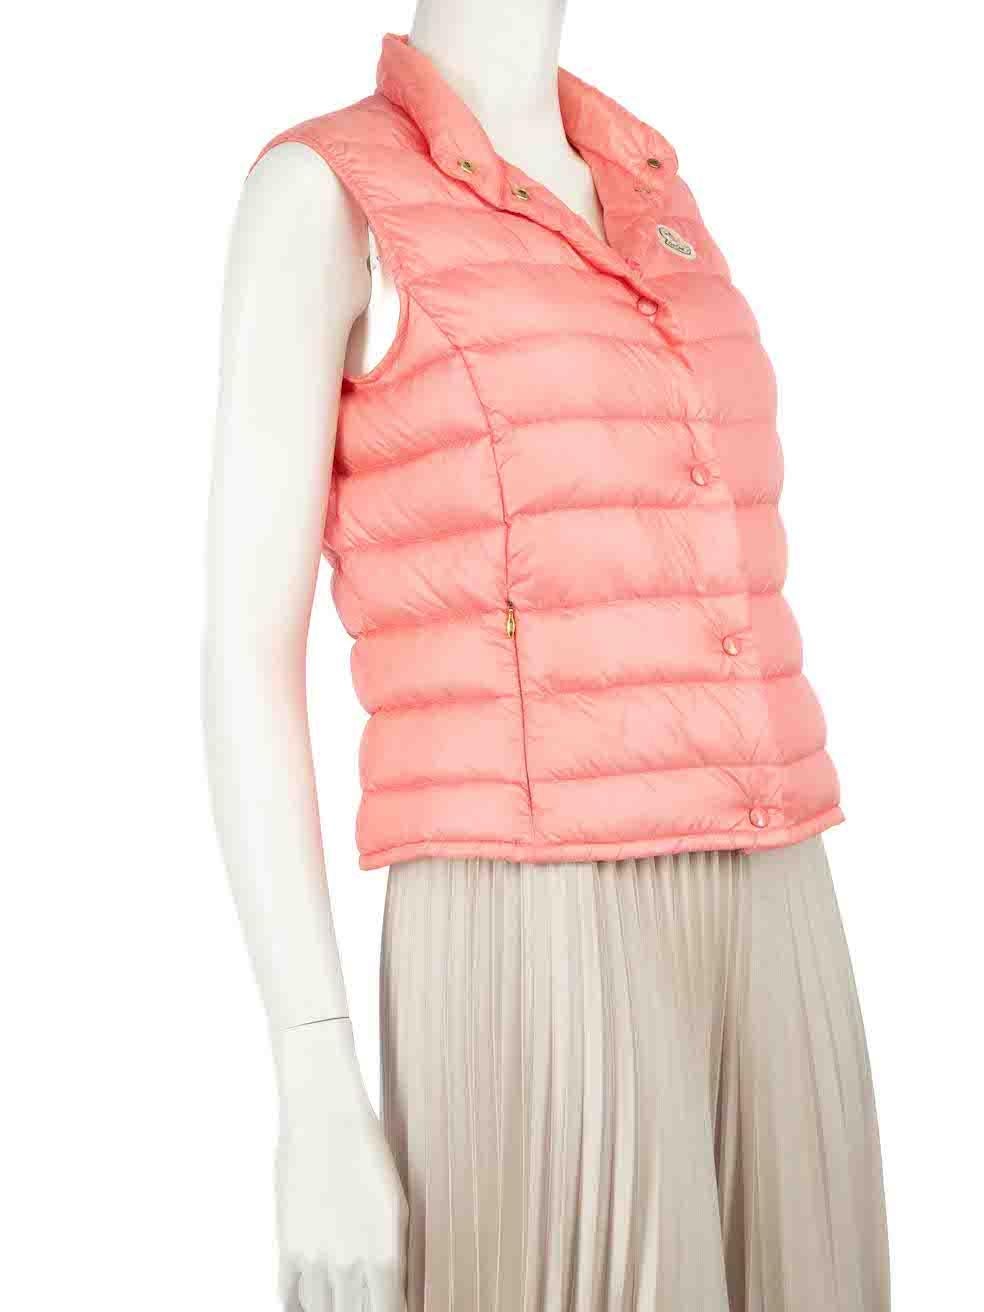 CONDITION is Very good. Minimal wear to jacket is evident. Minimal wear to the front with small mark on this used Moncler designer resale item.
 
 Details
 Pink
 Synthetic
 Gilet
 Quiltet
 Down filling
 Snap button fastening
 2x Side pockets
 
 
